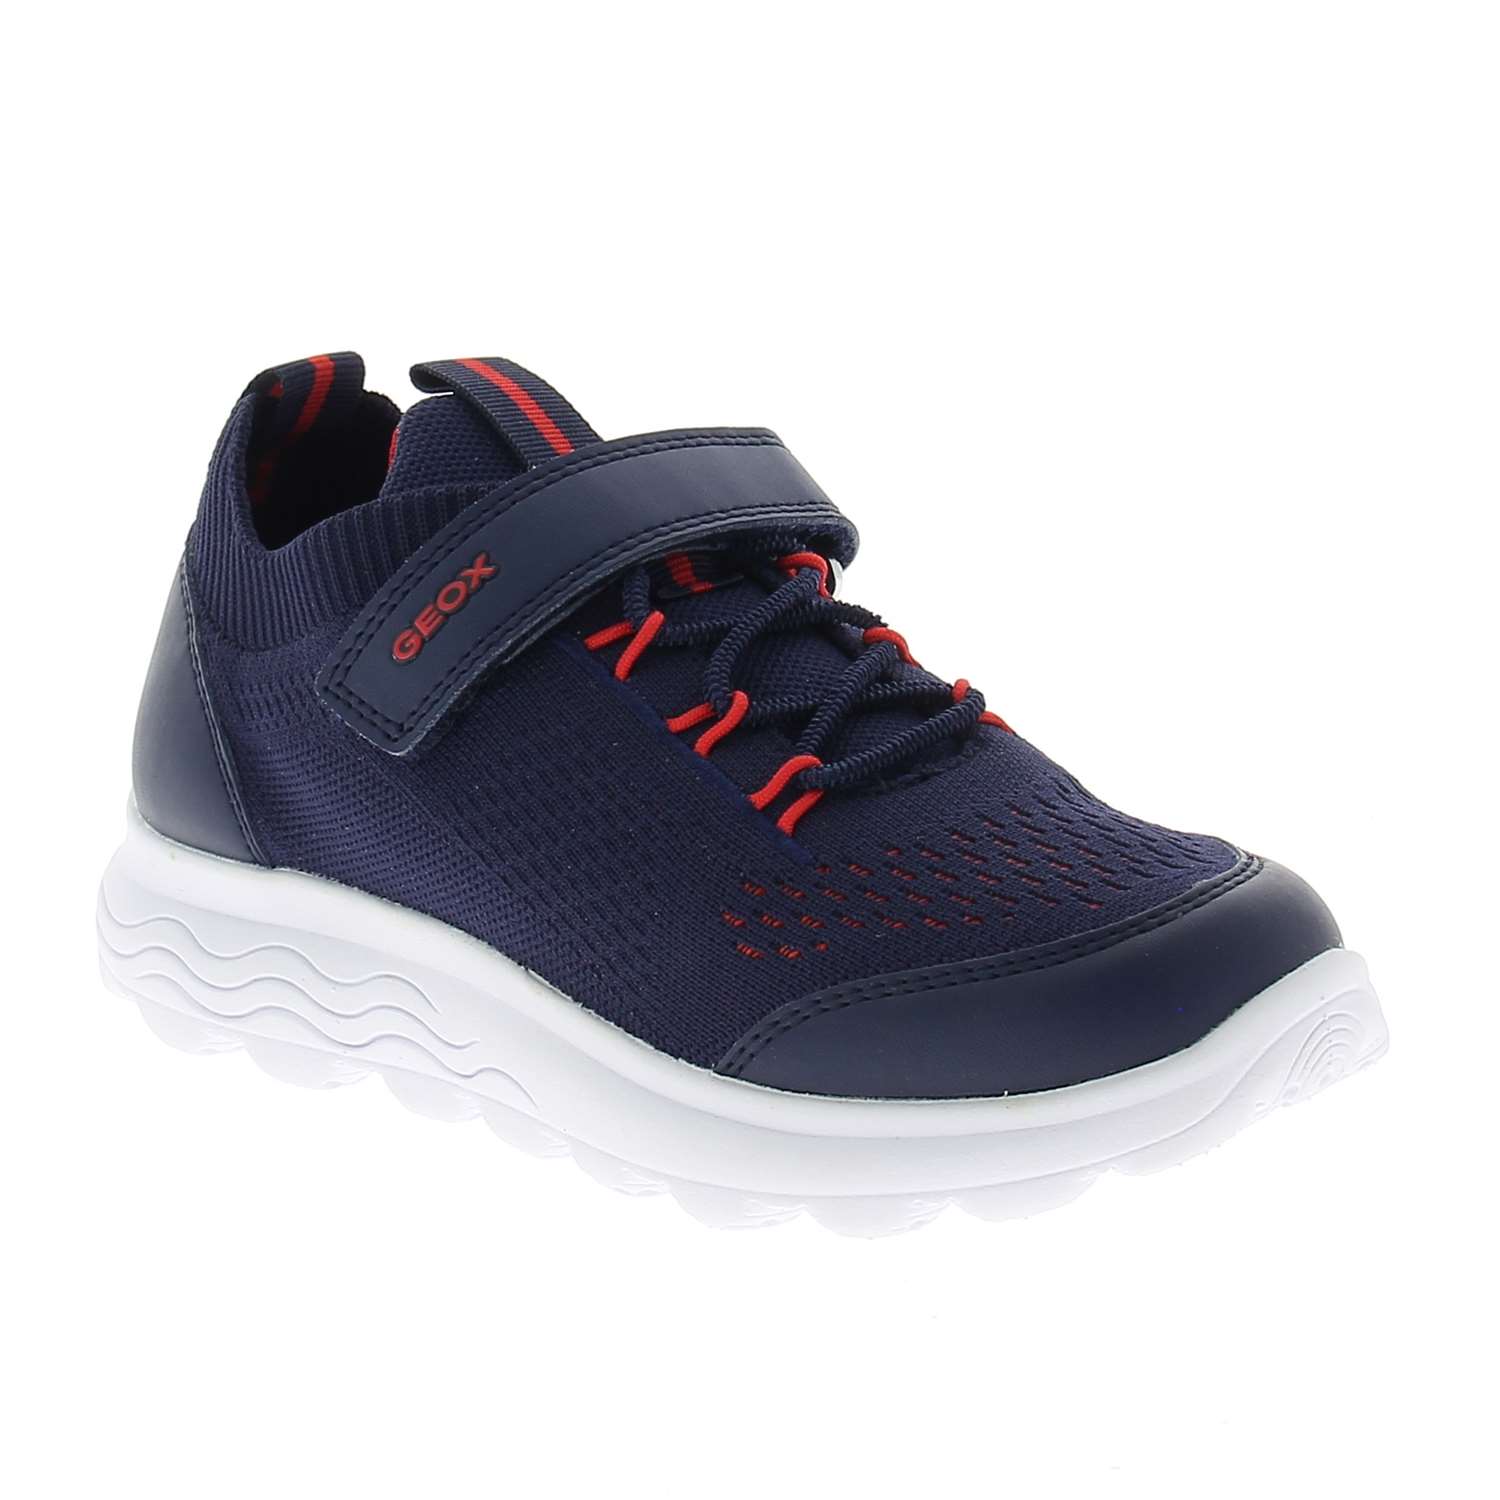 02 - SPHERICA JUNIOR - GEOX - Baskets - Synthétique